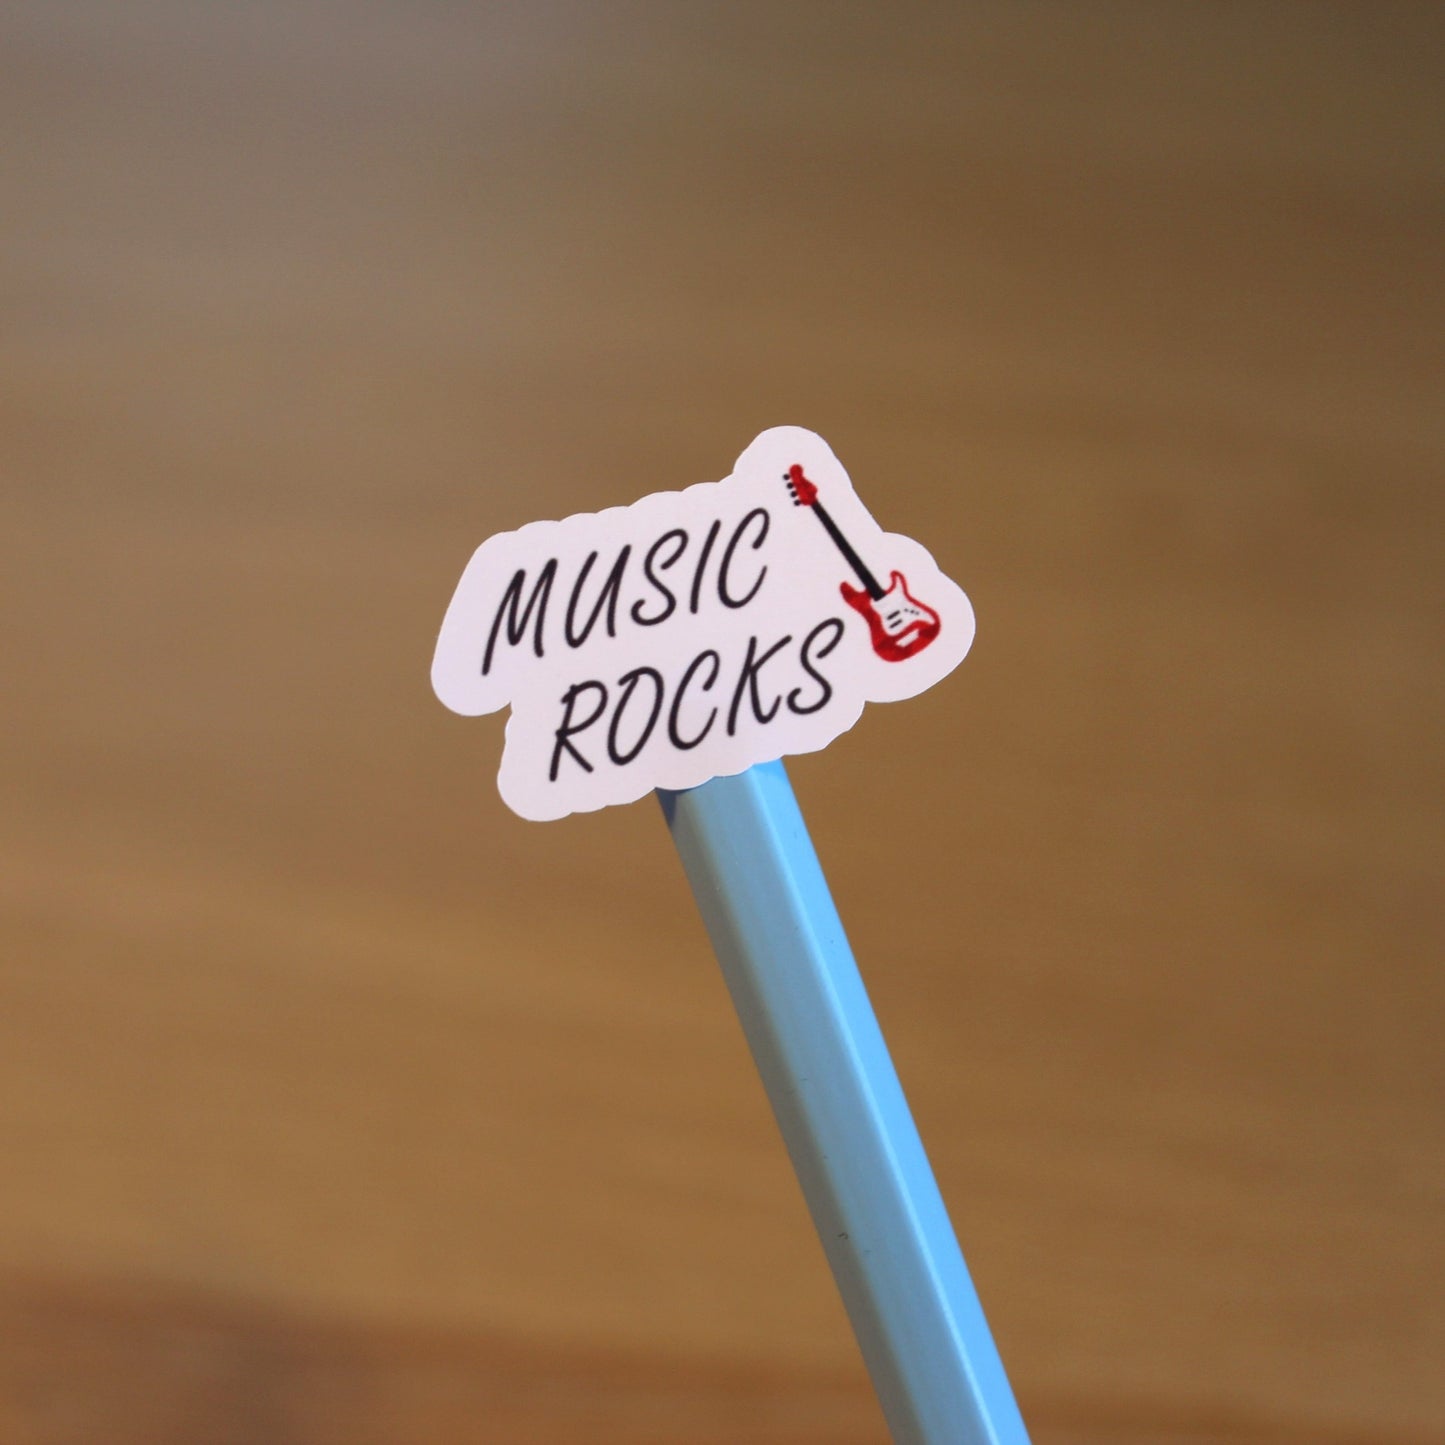 'Music Rocks' sticker displayed on the end of a pencil